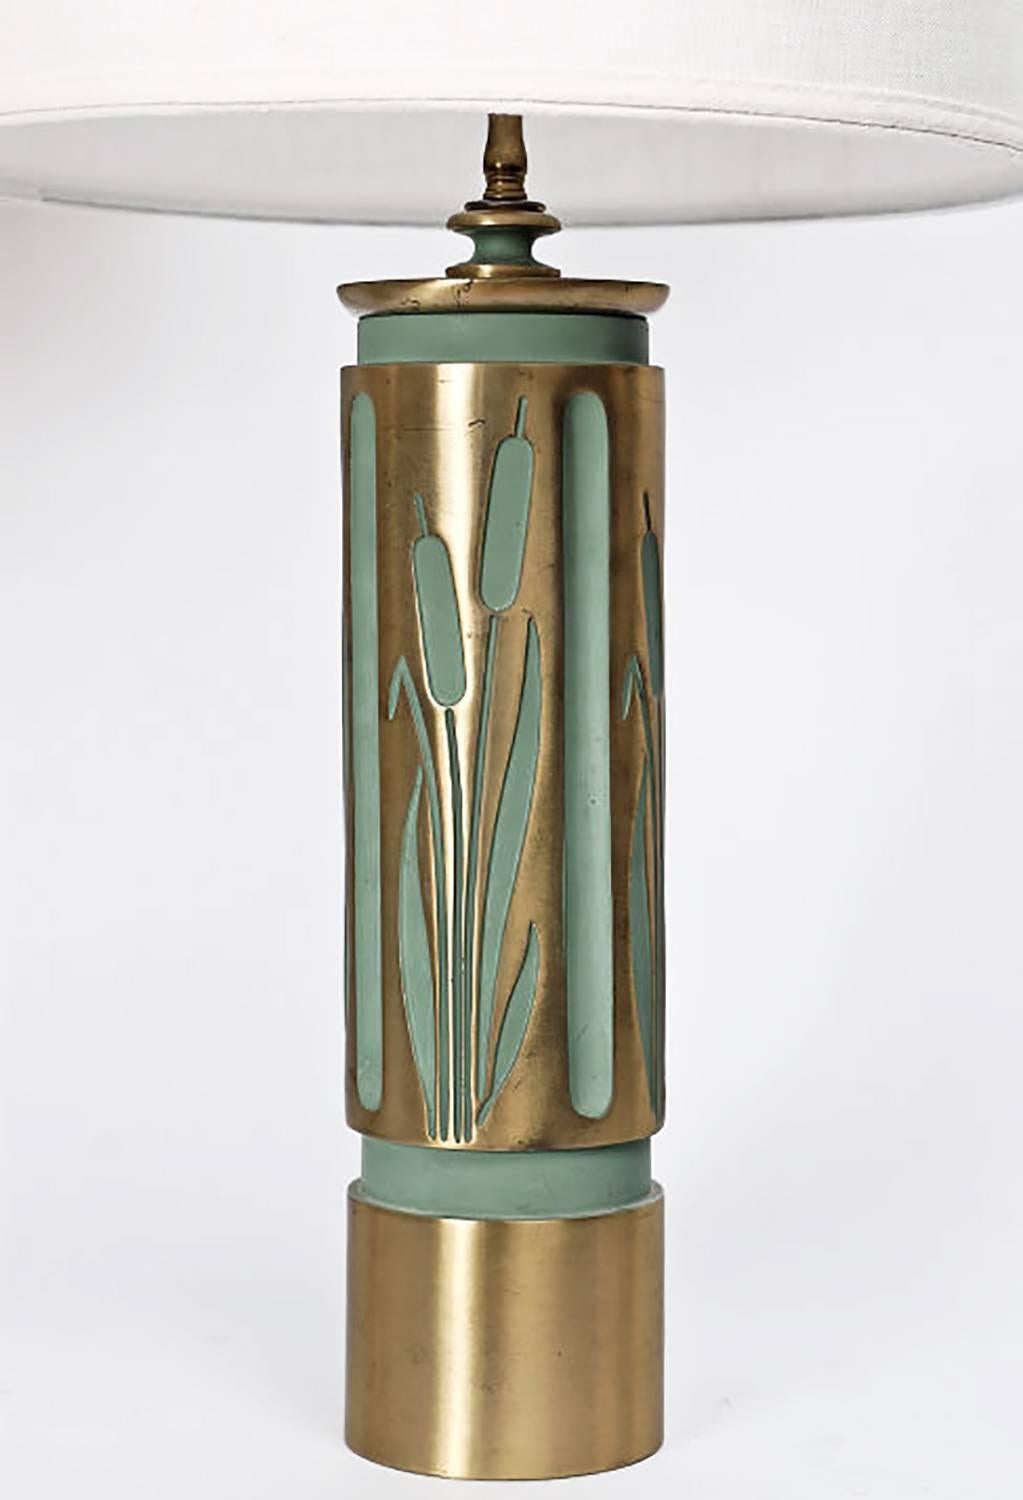 Rare and unusual pair of table lamps, cast with cattail design. Components machined with amazing precision, including the matching finned finials. All recessed areas painted an Art Deco sage green. Single brass sock with three way switch, brass harp